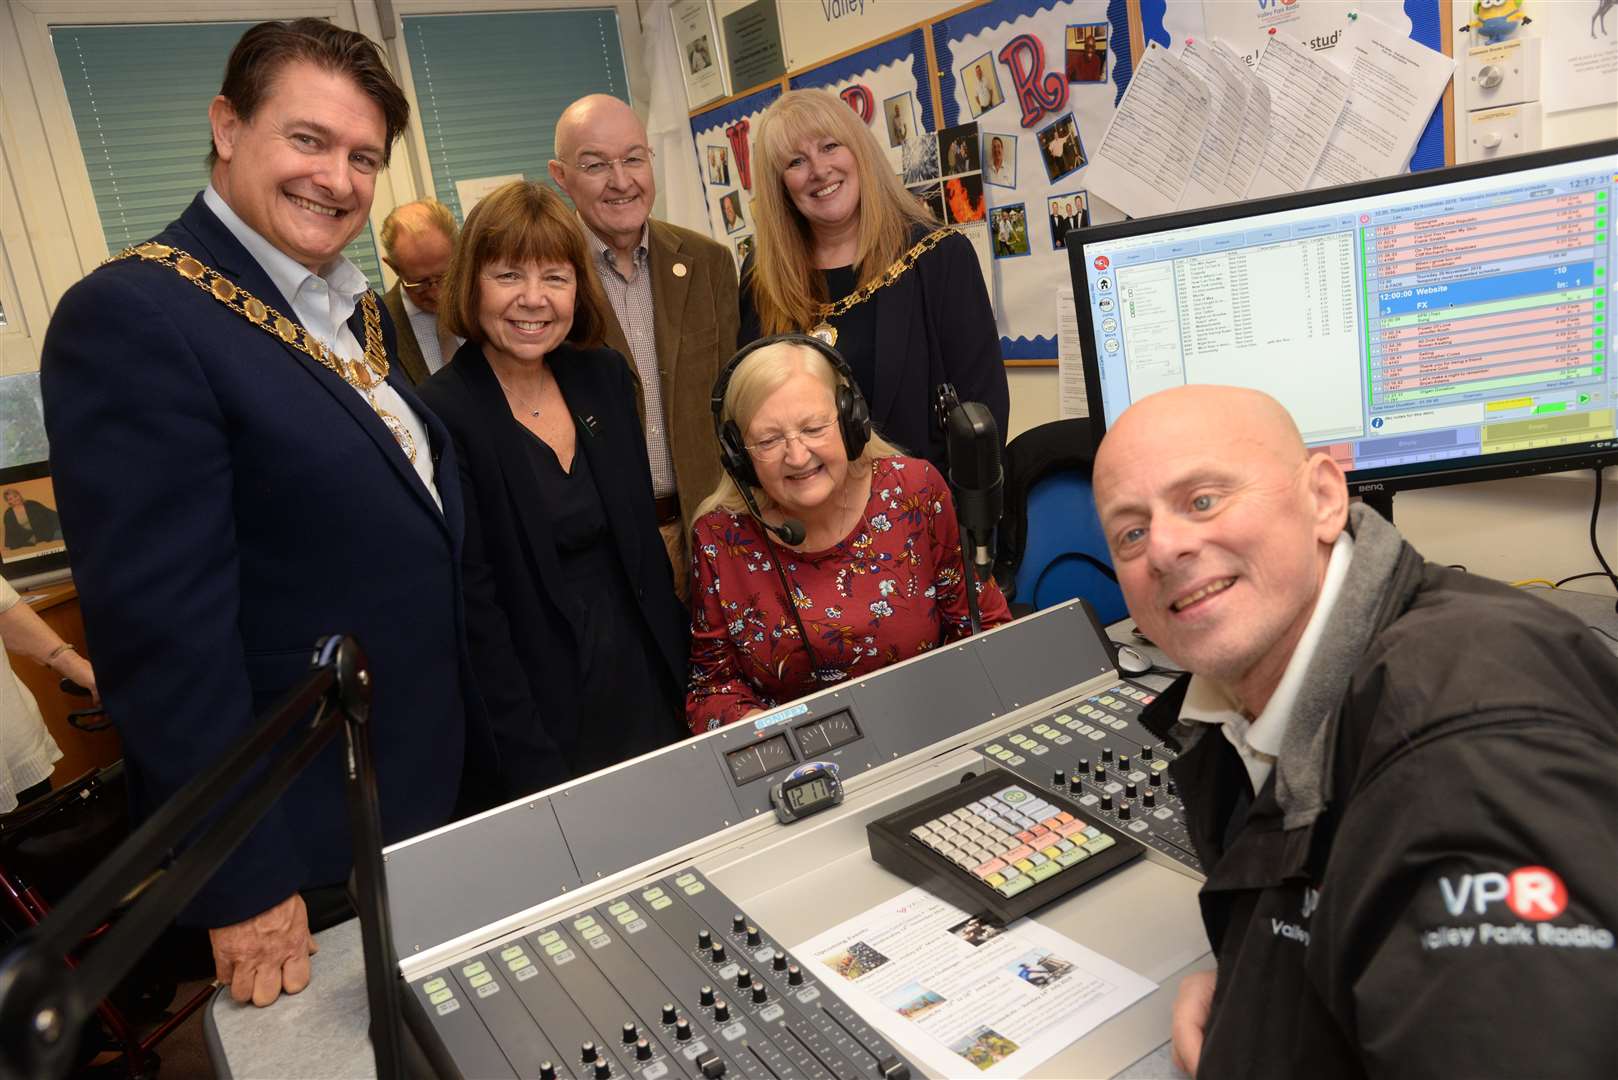 Mayor of Dartford Cllr David Mote and Lady Mayoress Ellen Mote and others at the new Valley Park Radio studio, picture Chris Davey